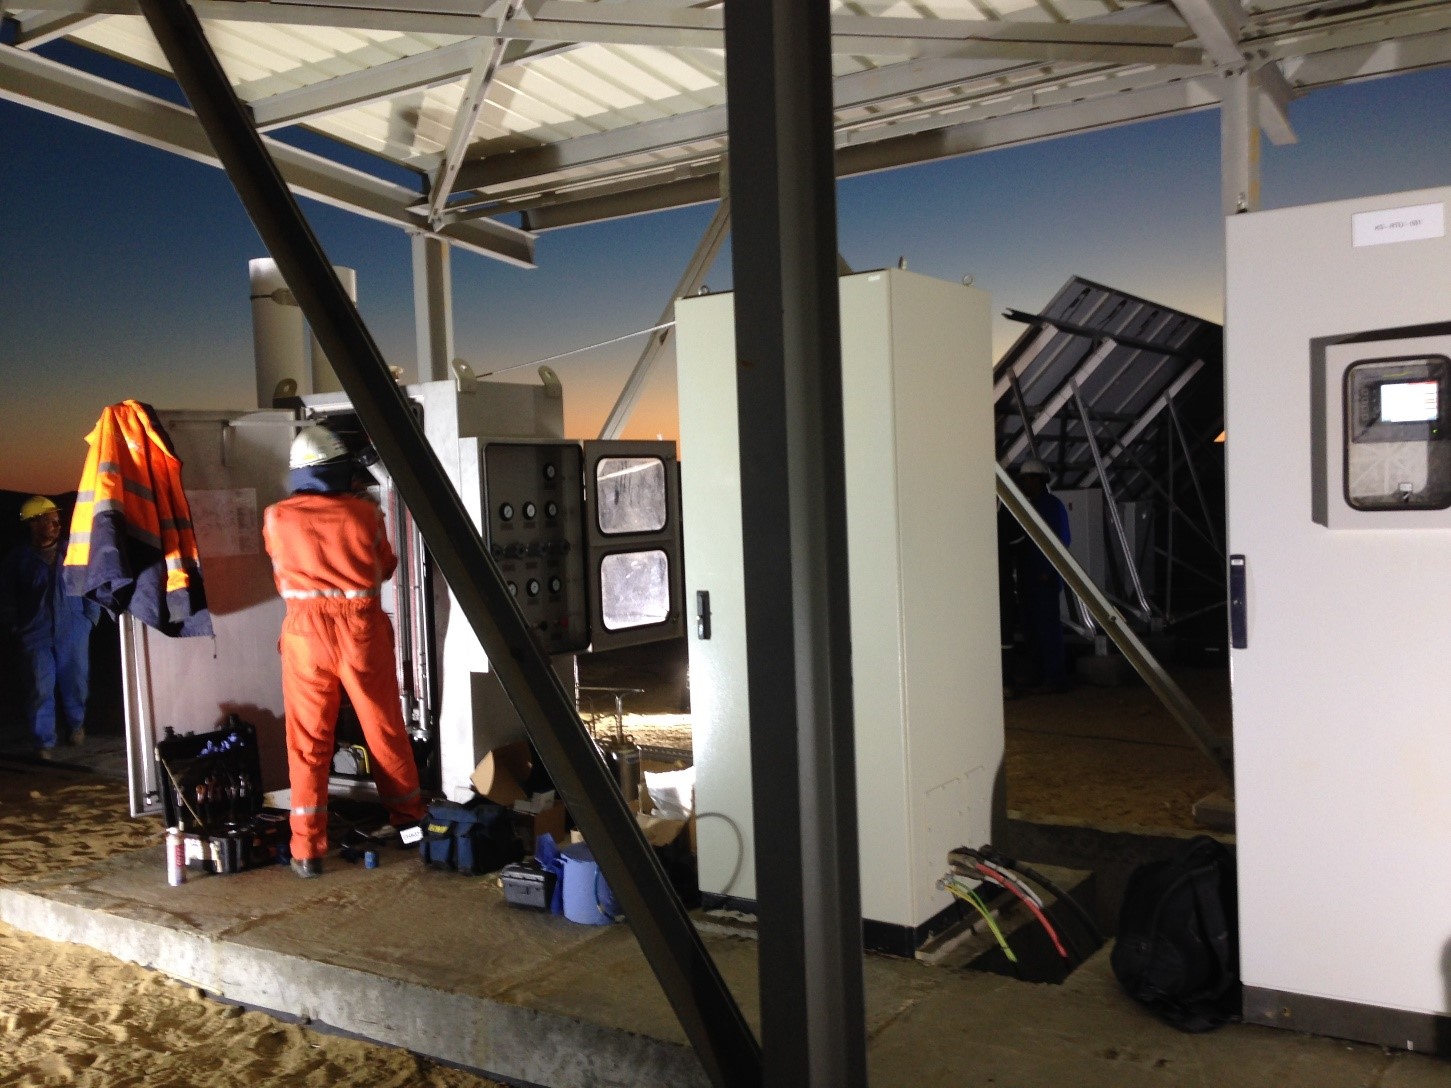 working on multiple well head solar power installations in Egypt/Tunesia at night